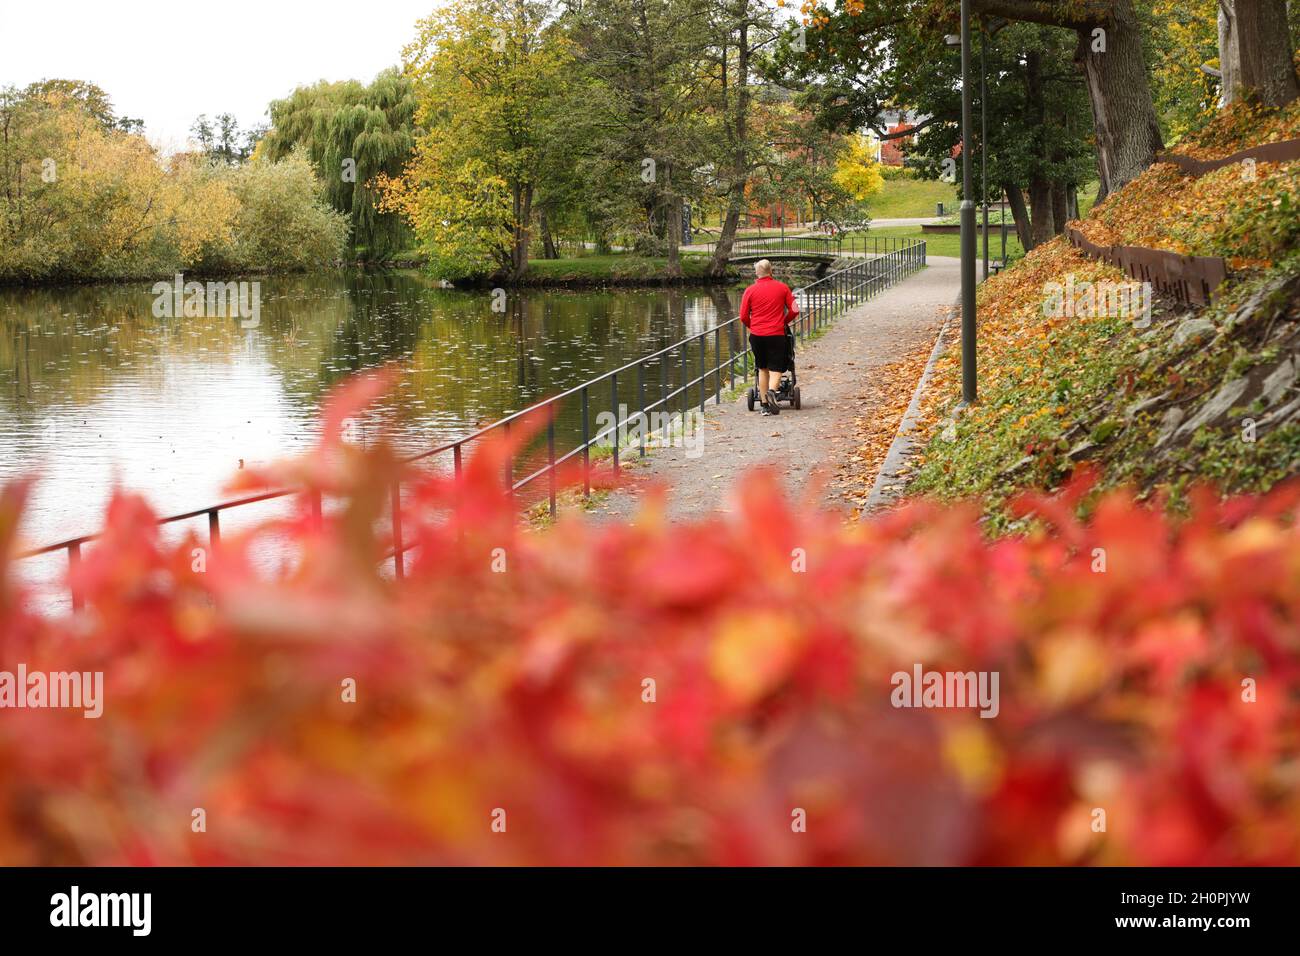 Nice autumn colors and along the Stångån / Kinda canal in the city of Linköping, Sweden. Stock Photo